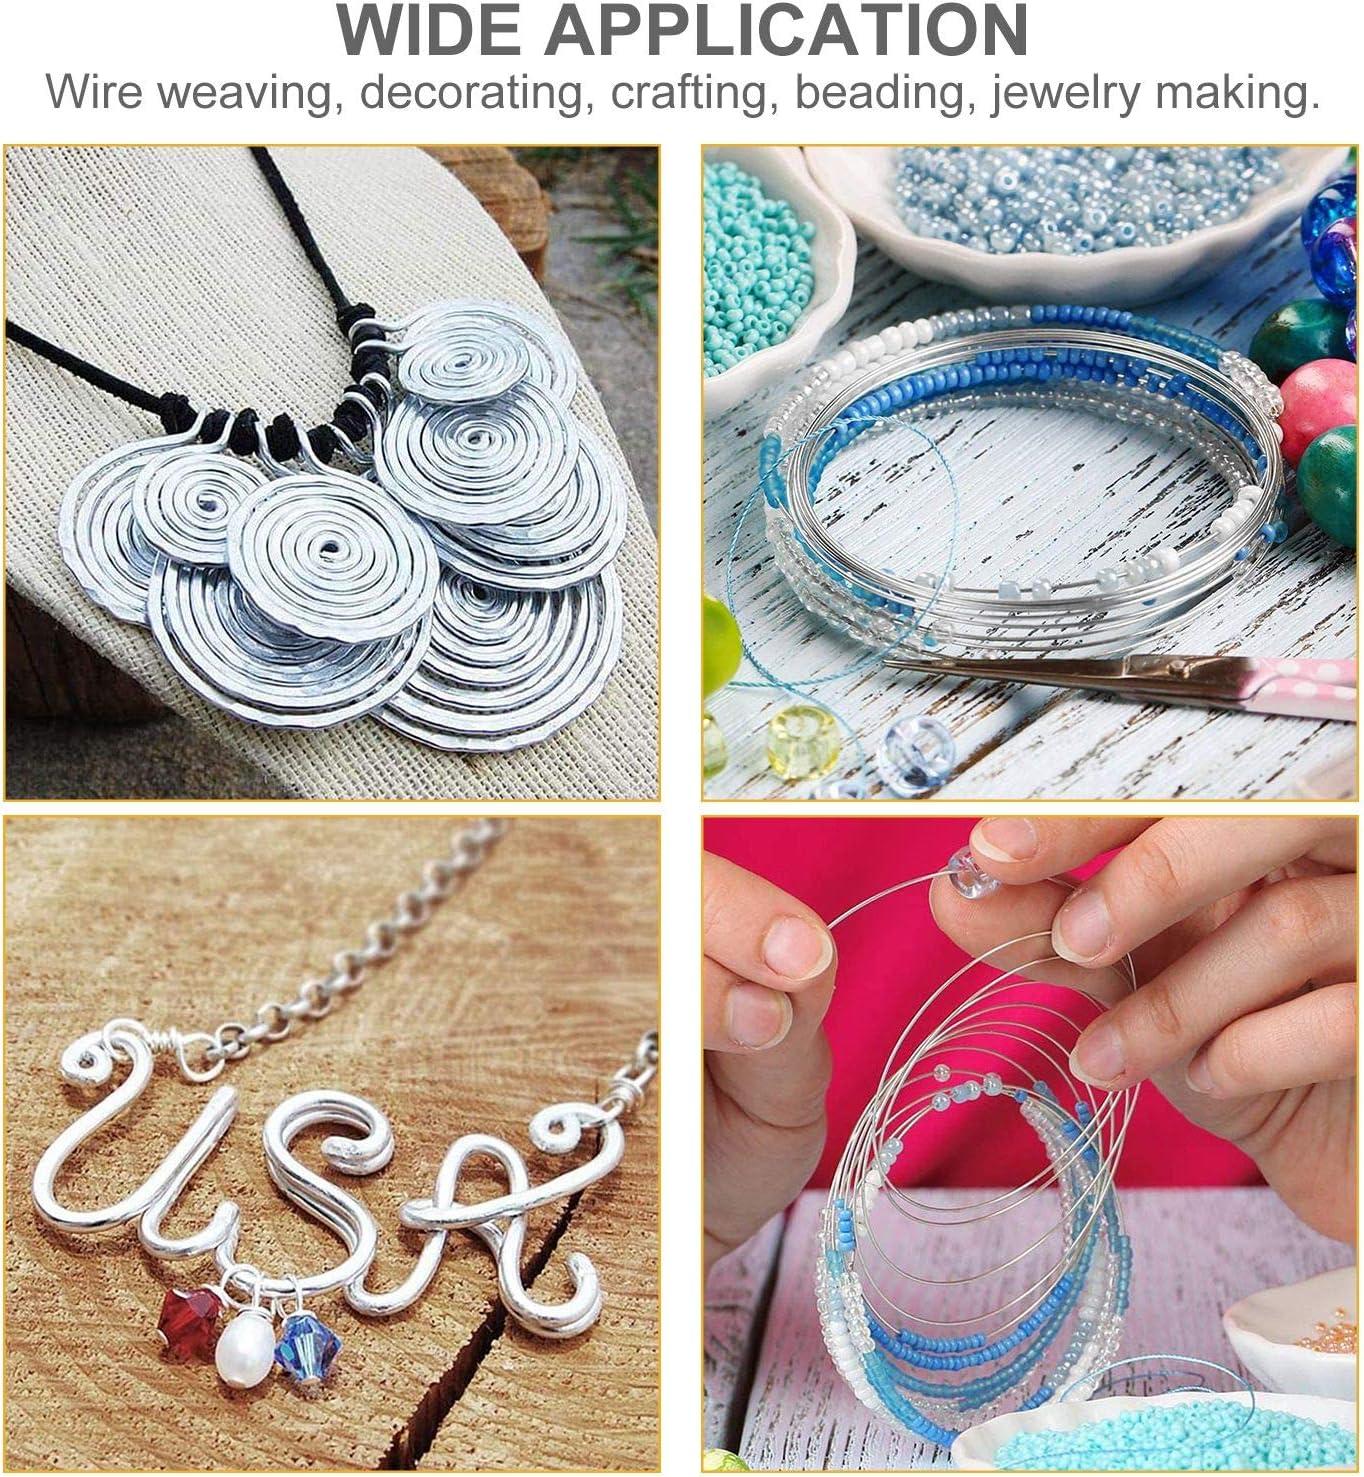 10-18 Gauge Aluminum Wire Anodized Floral Beading Craft Wires DIY